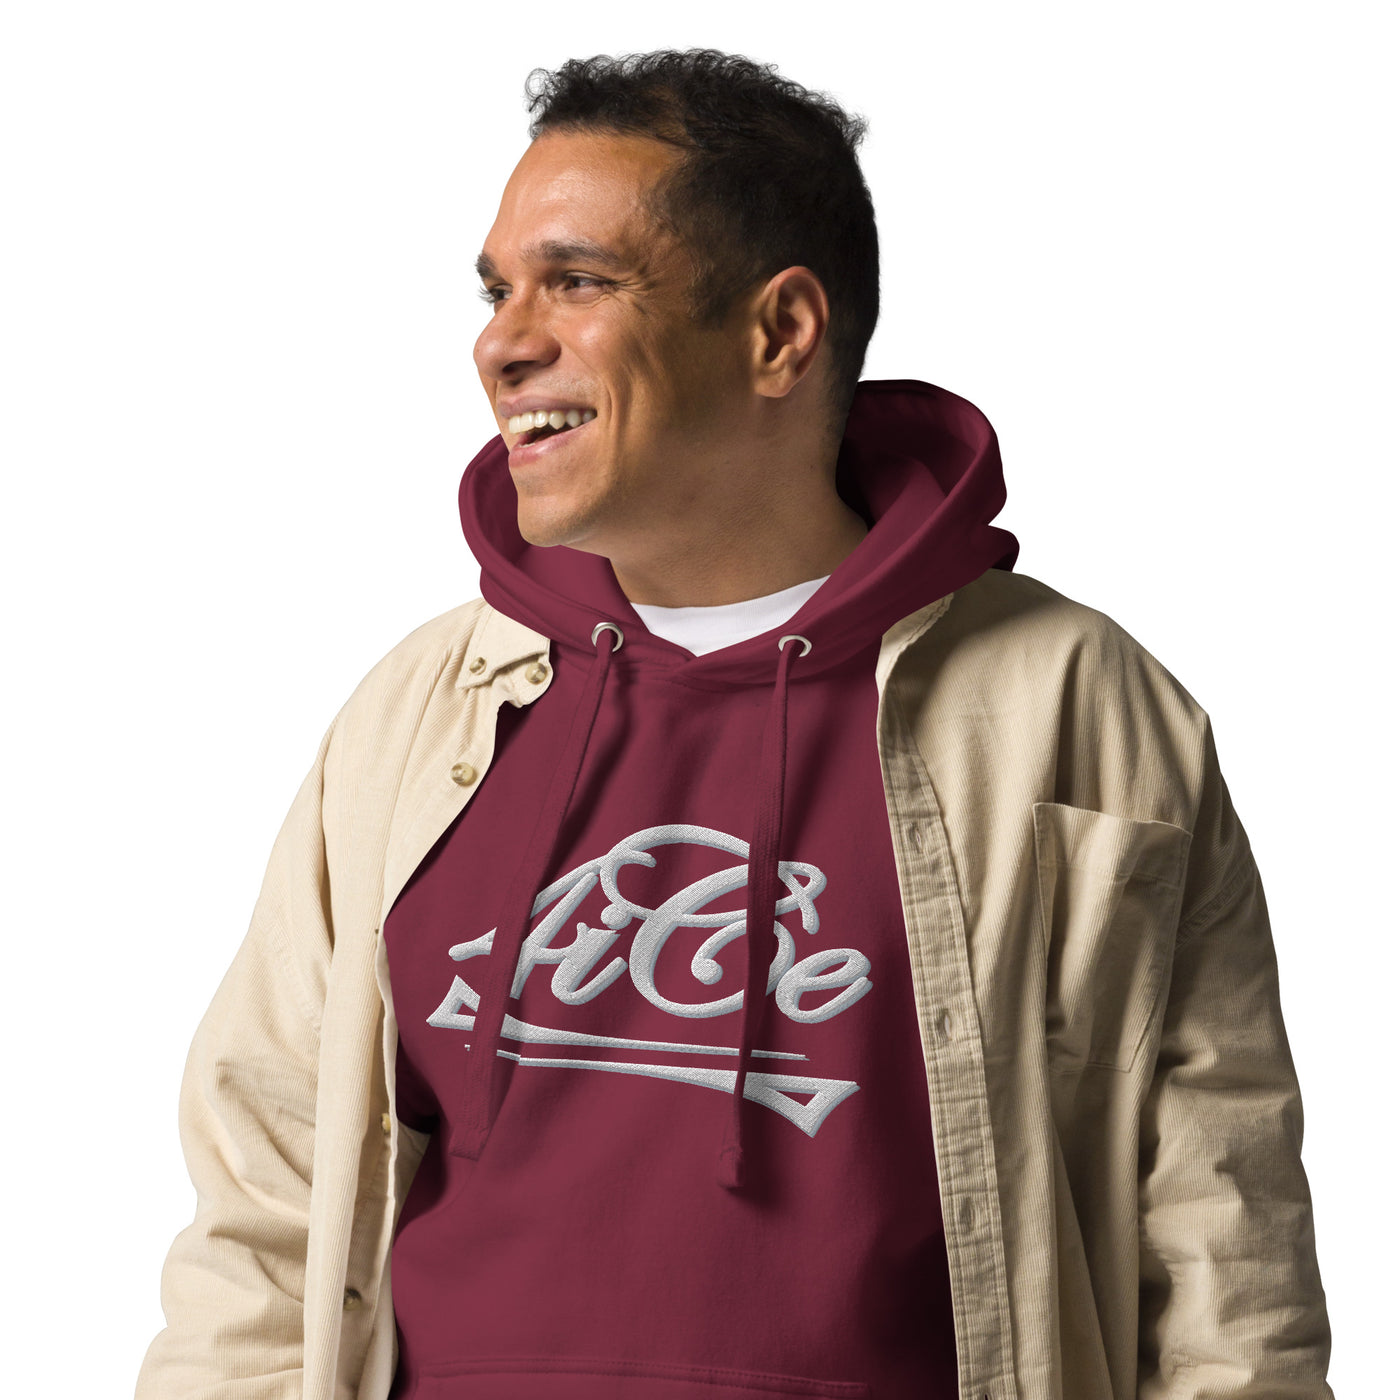  4iCe® Elite Boxing maroon embroidered hoodie zoomed in